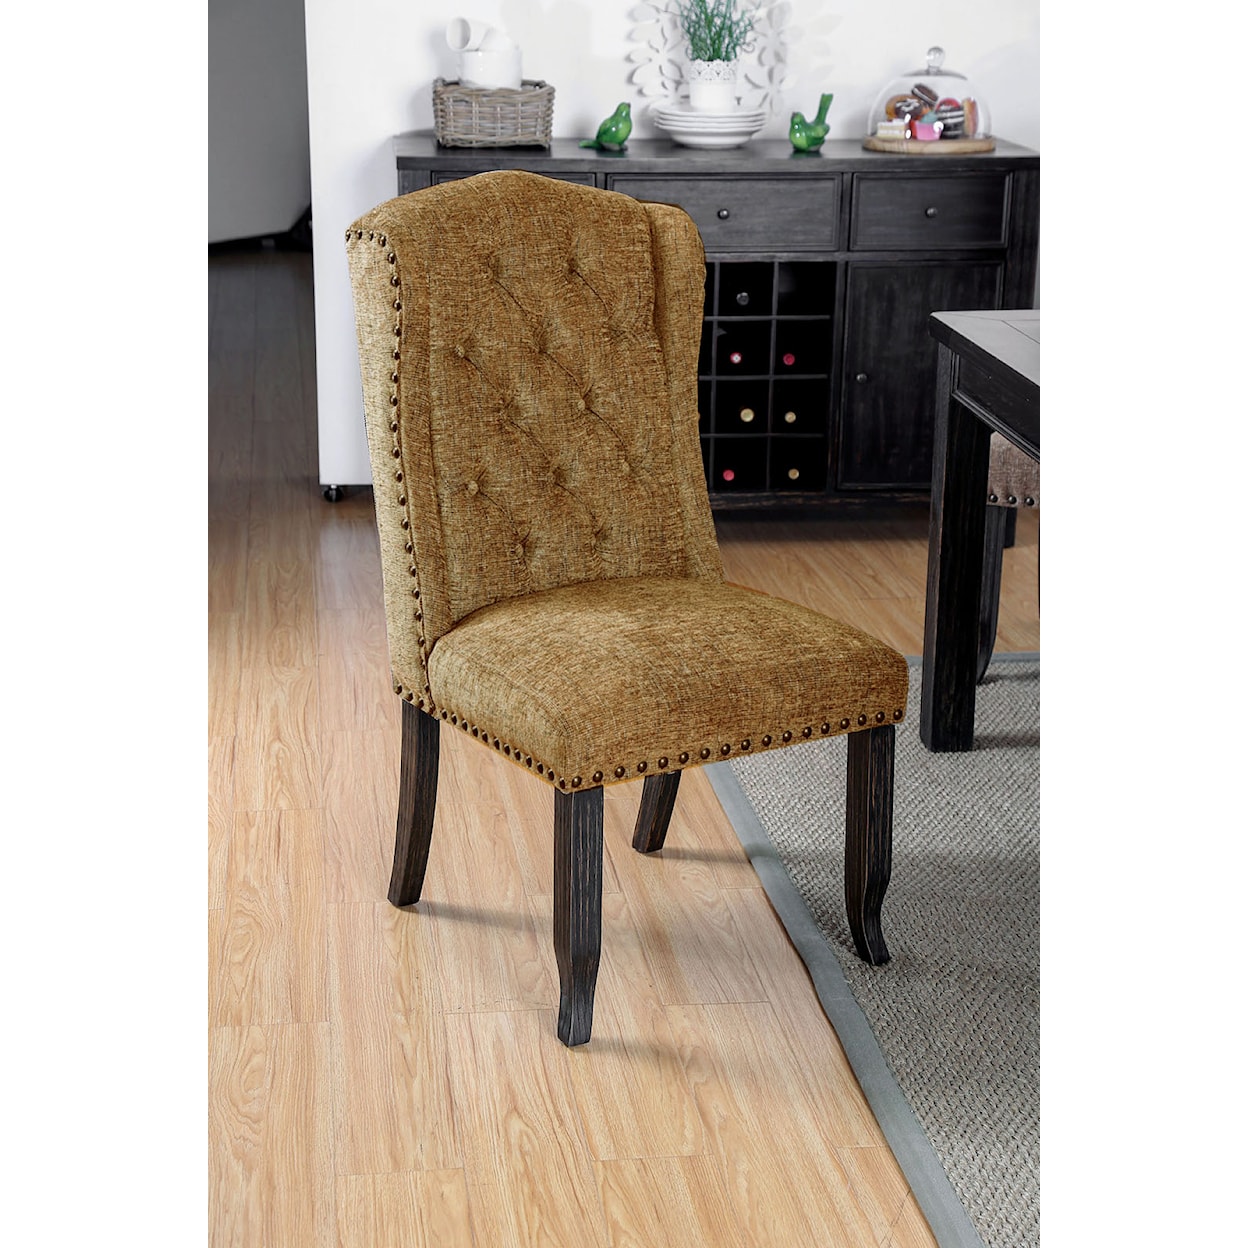 Furniture of America Sania III Set of 2 Upholstered Wingback Chairs